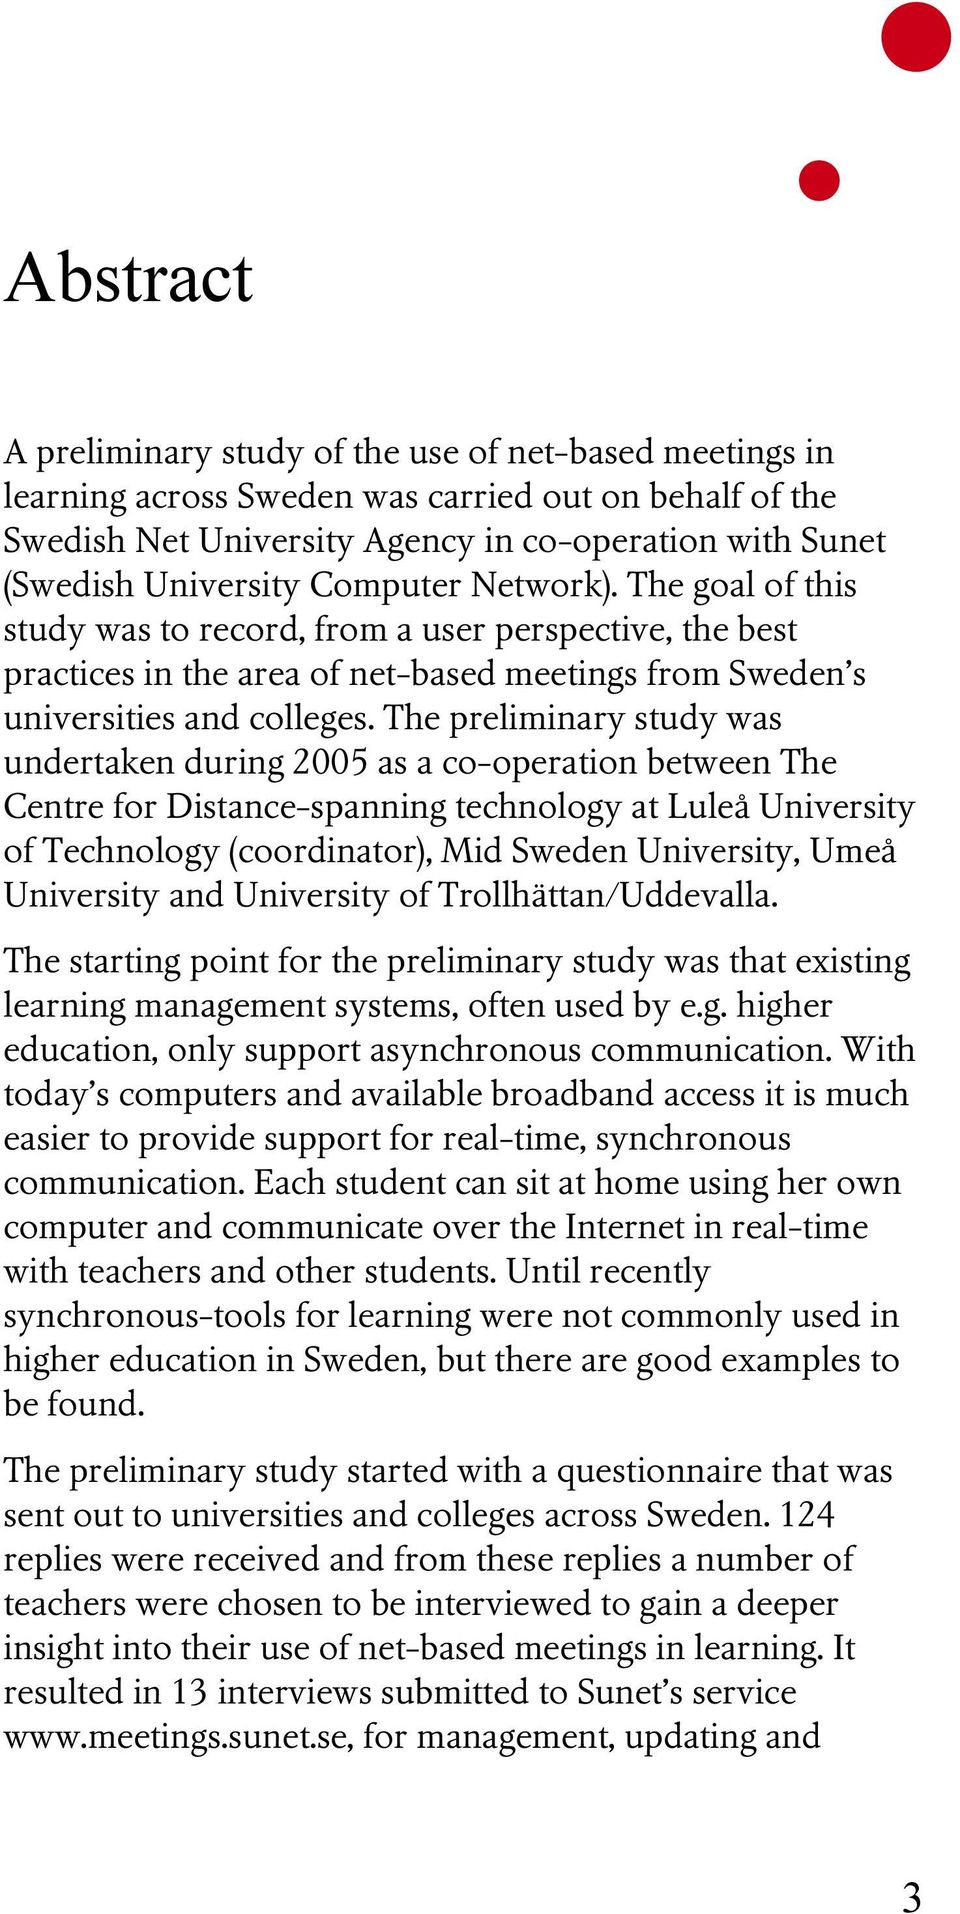 The preliminary study was undertaken during 2005 as a co-operation between The Centre for Distance-spanning technology at Luleå University of Technology (coordinator), Mid Sweden University, Umeå